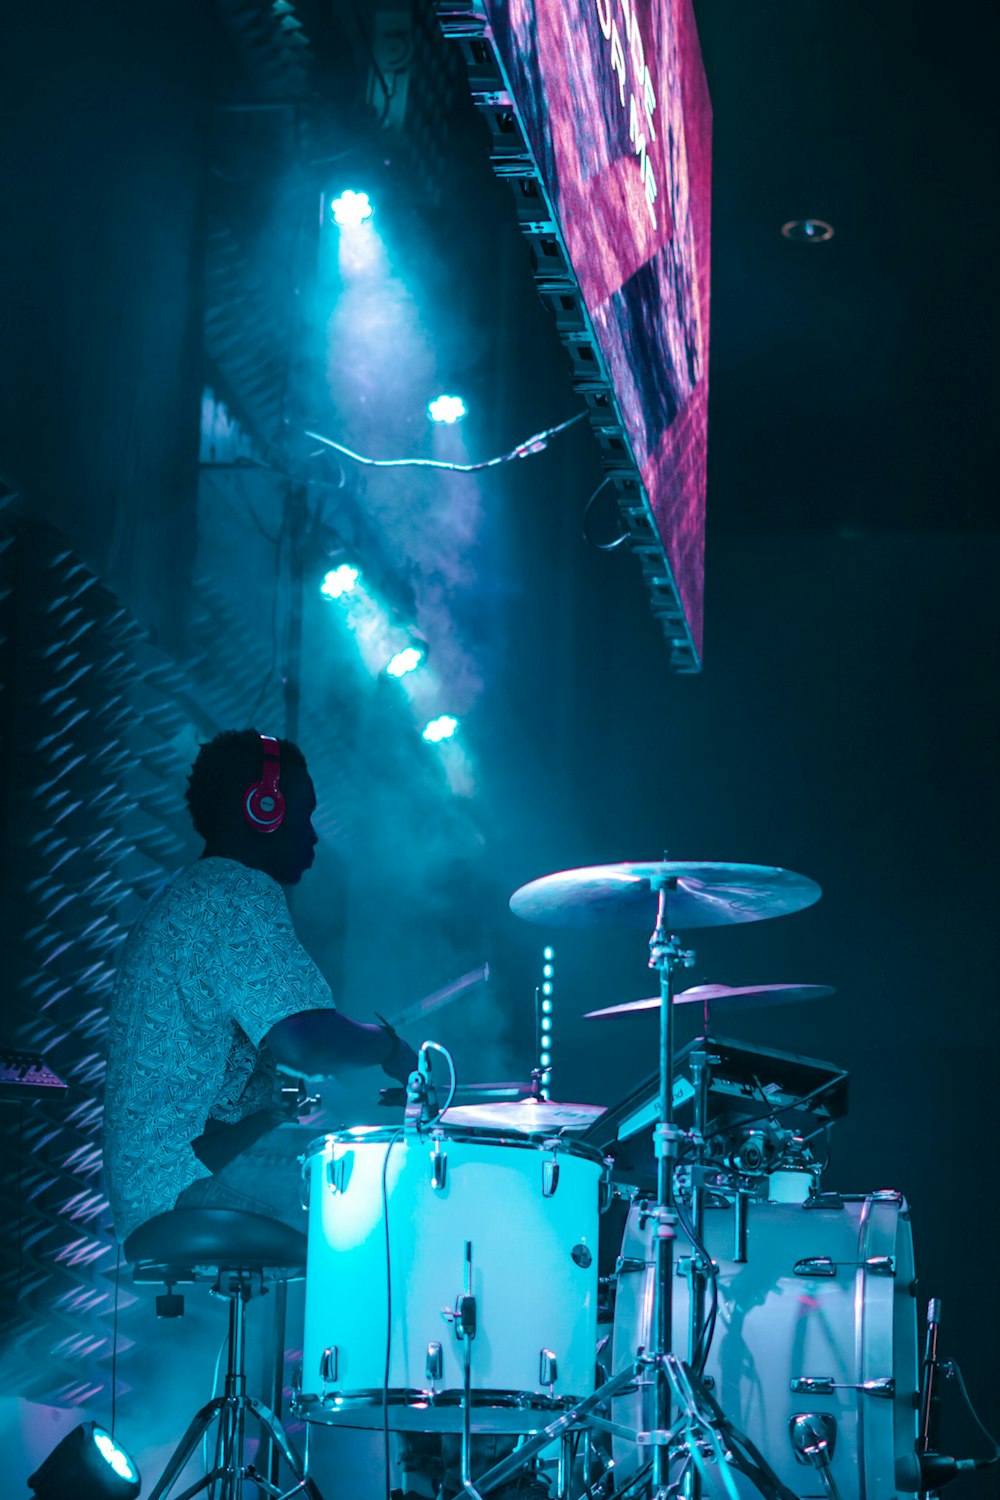 man wearing white and gray t-shirt using red headphones while playing drums